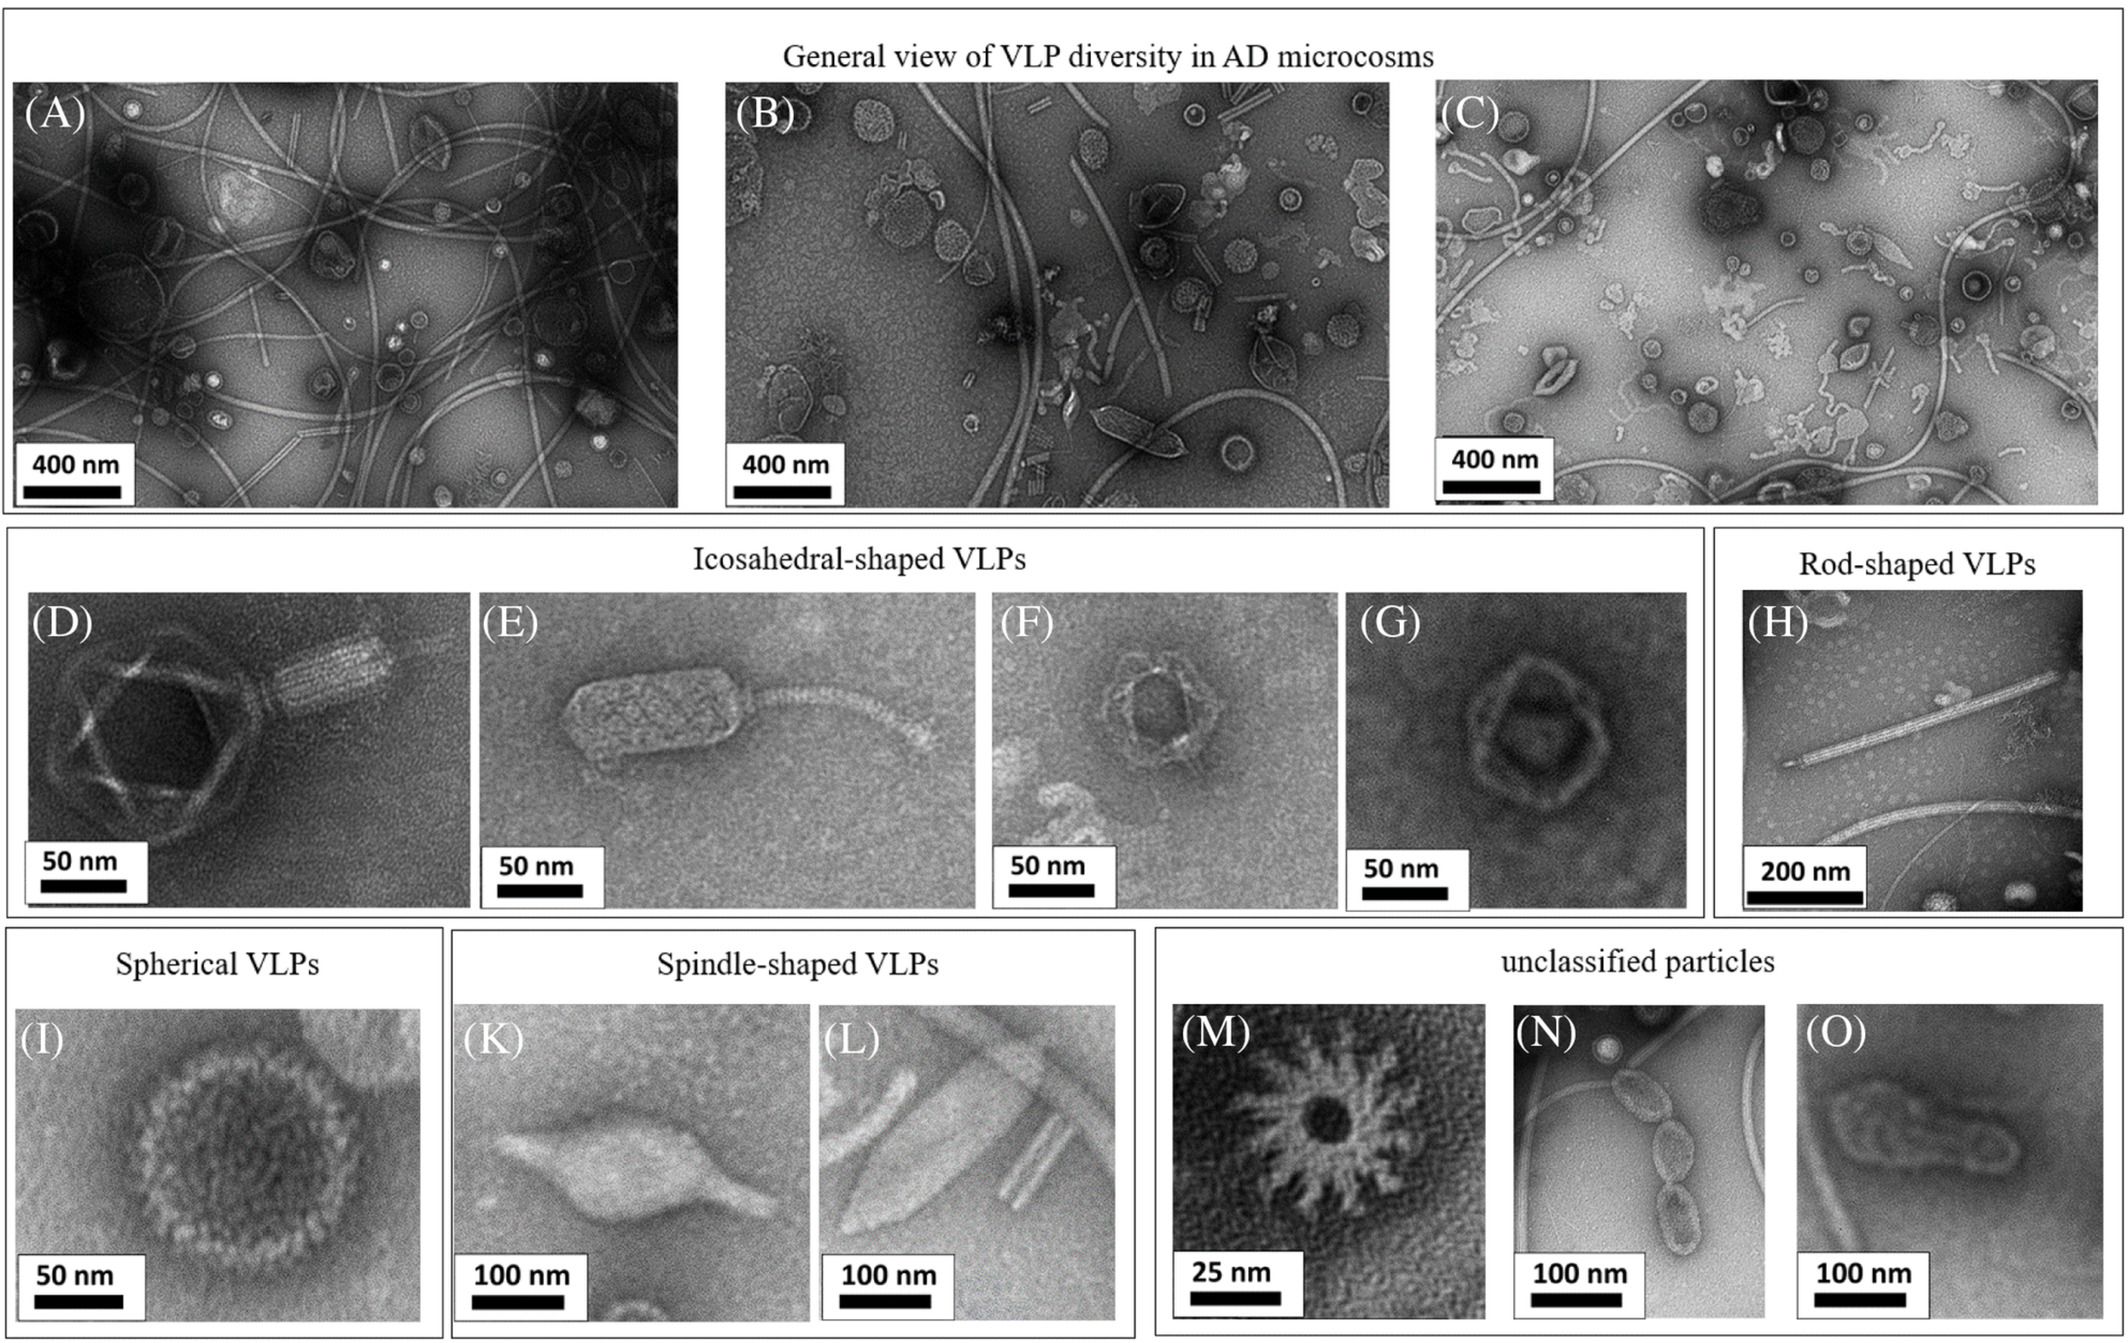 Morphotypic diversity of VLPs in different microcosms, observed by TEM